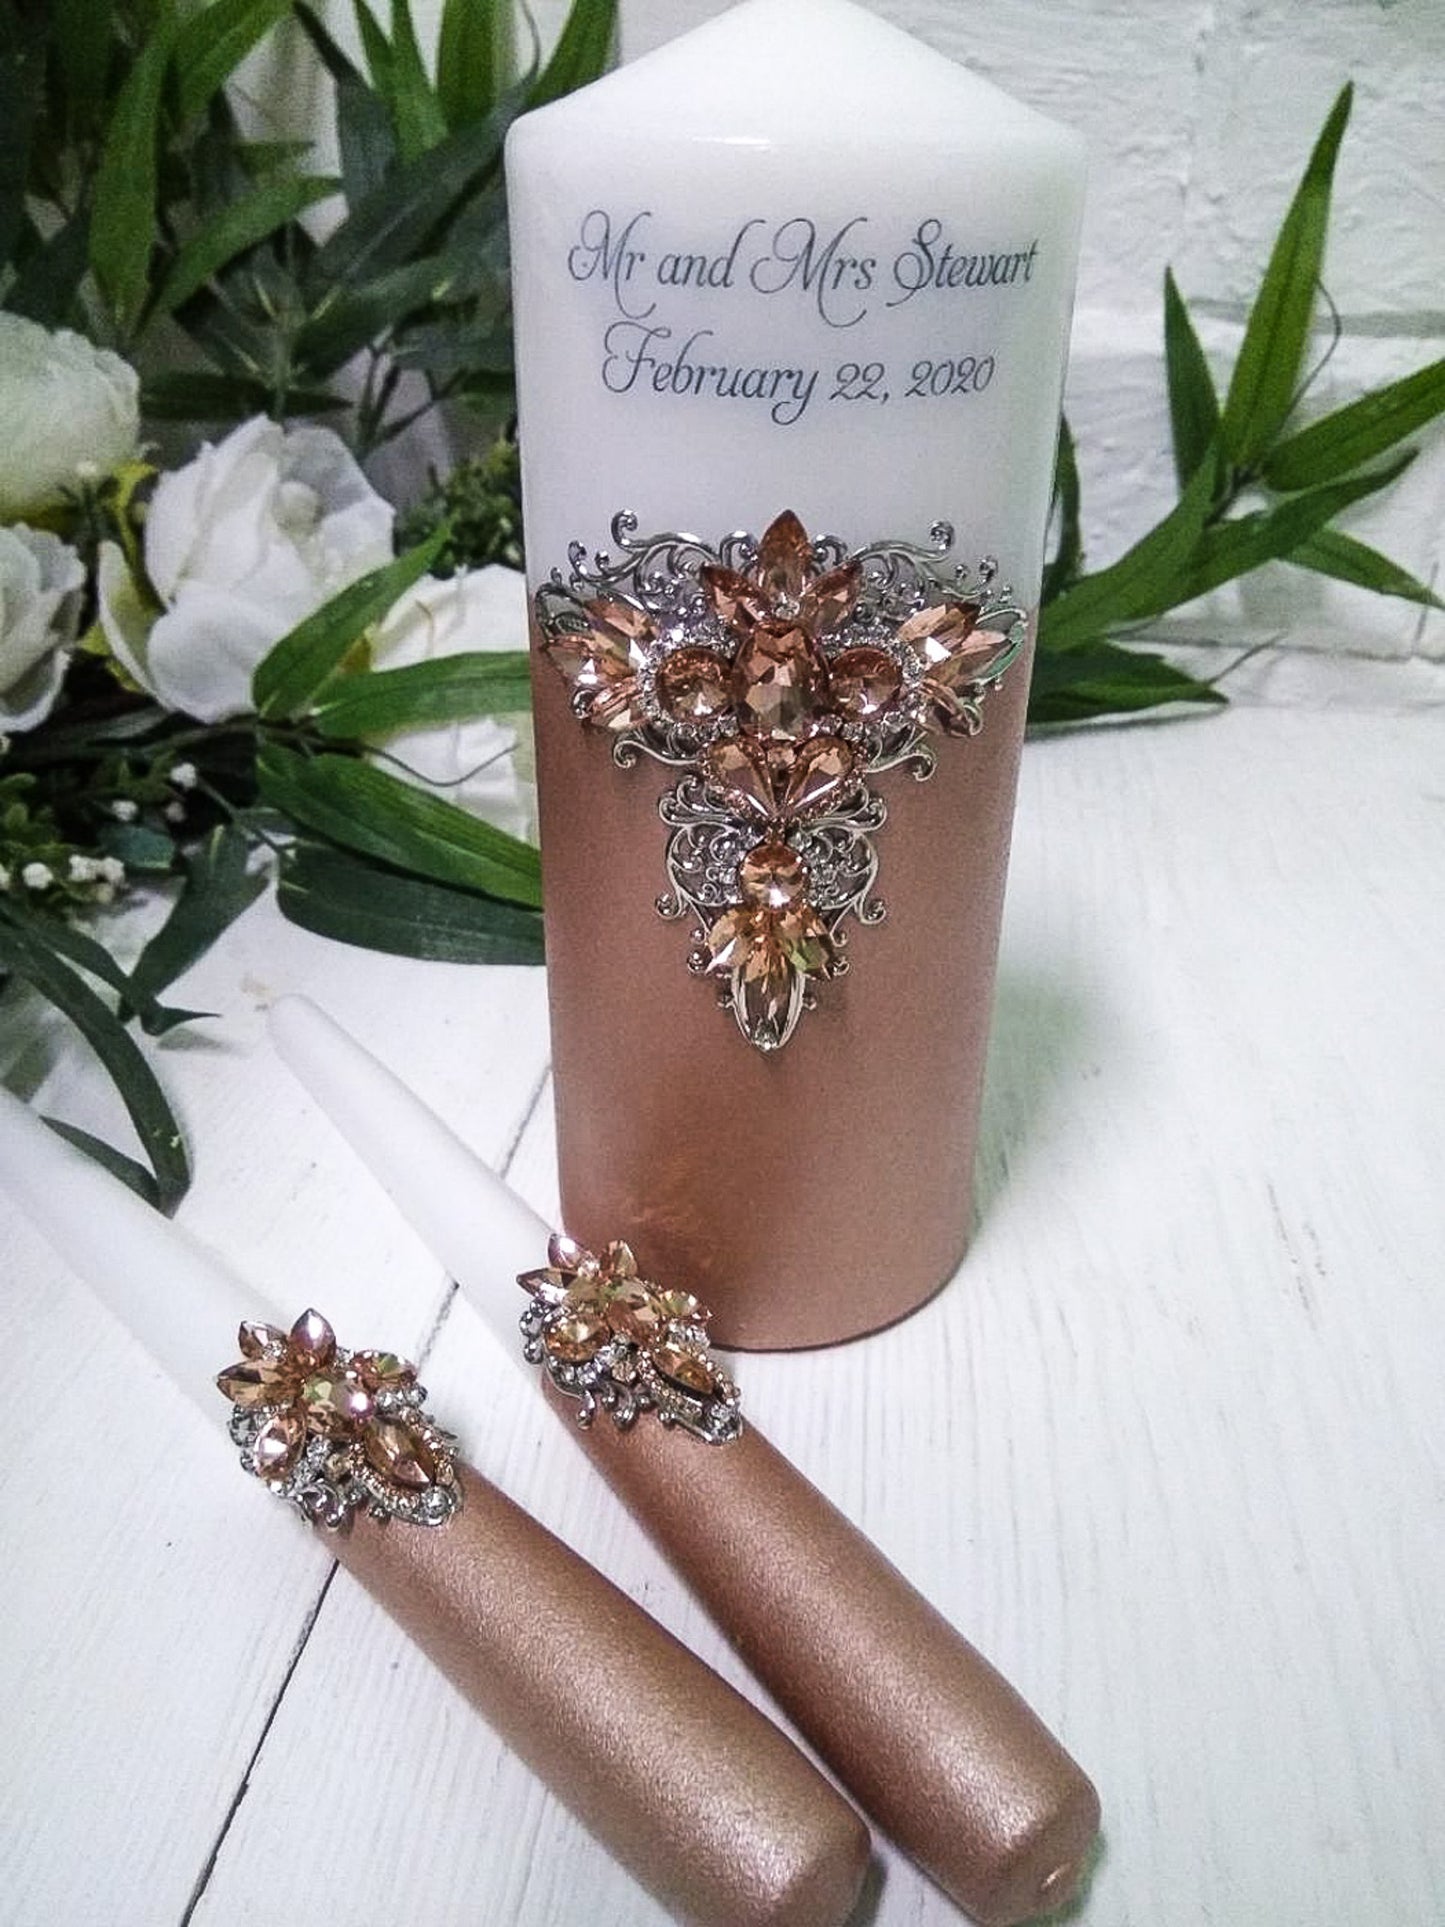 Personalized Rose Gold and Silver Decorative Unity Candles for Couples